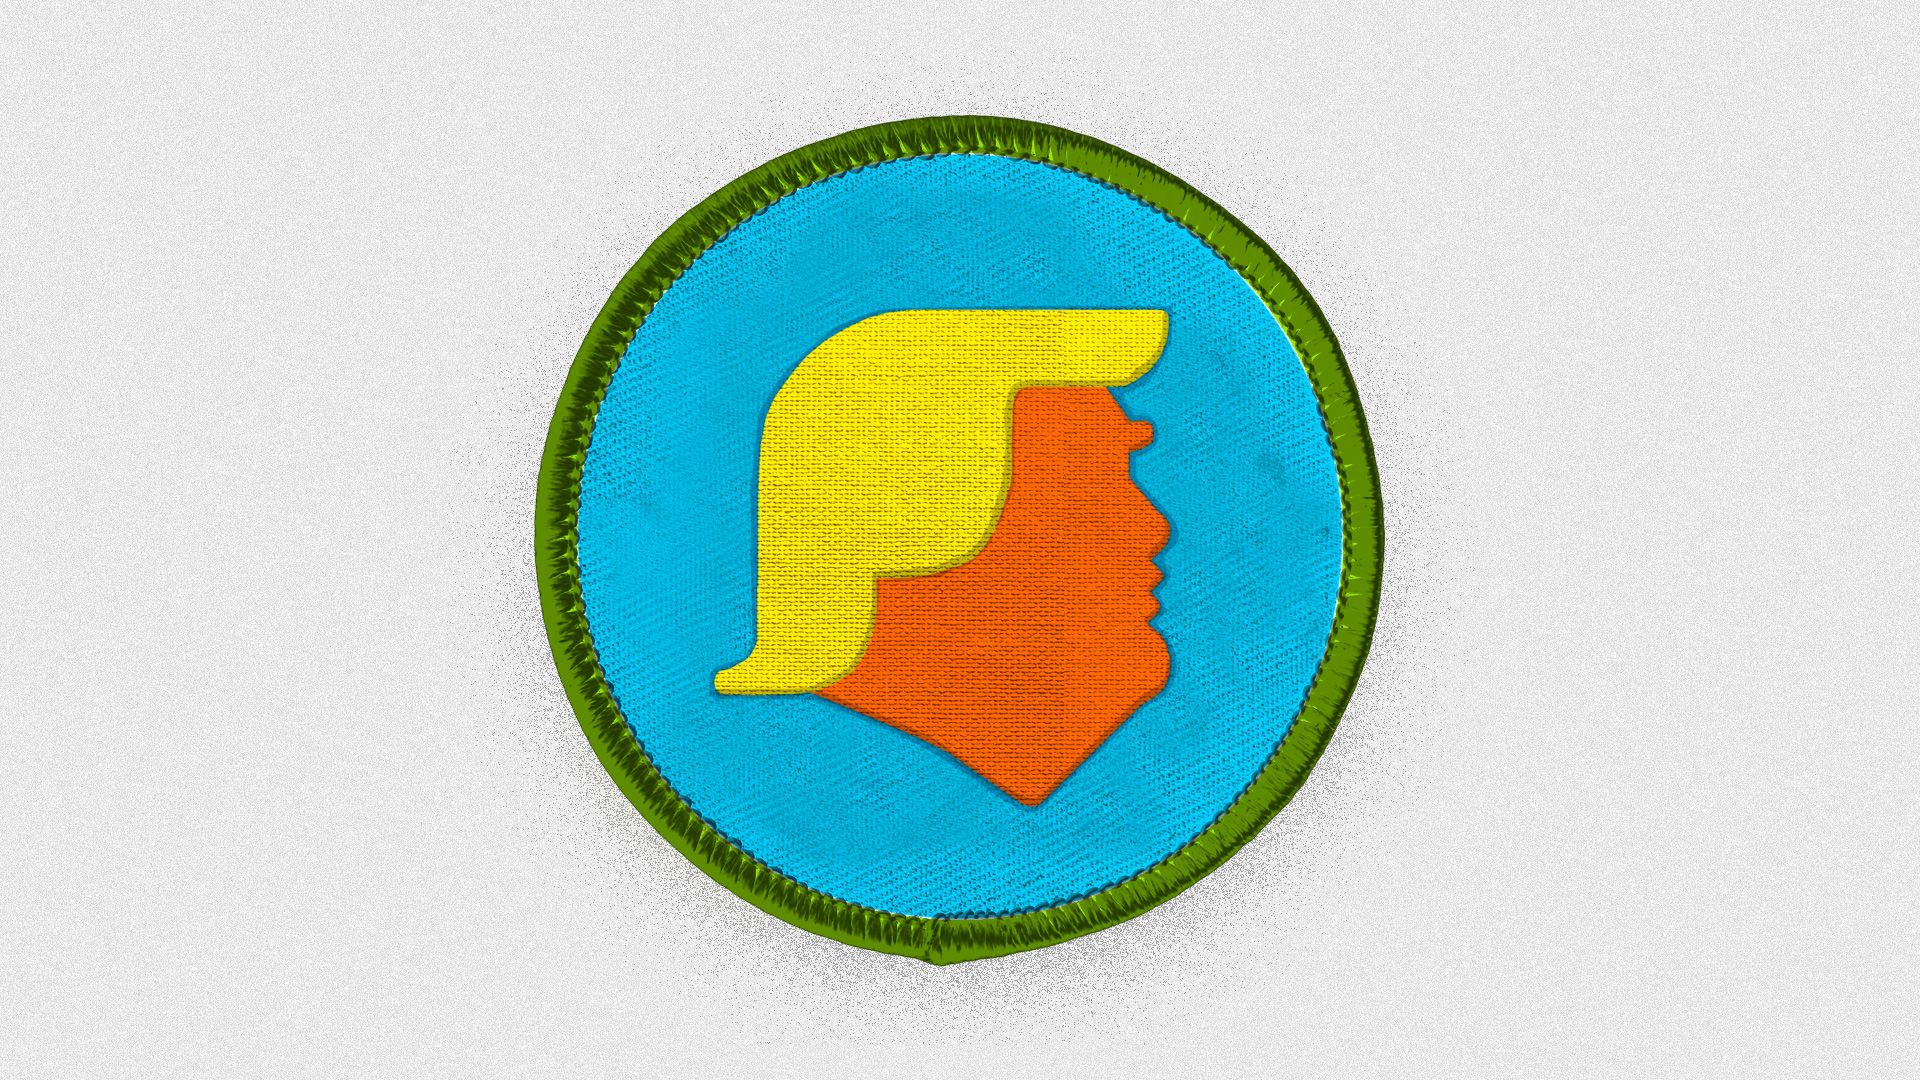 A scout badge bearing the profile of Donald Trump